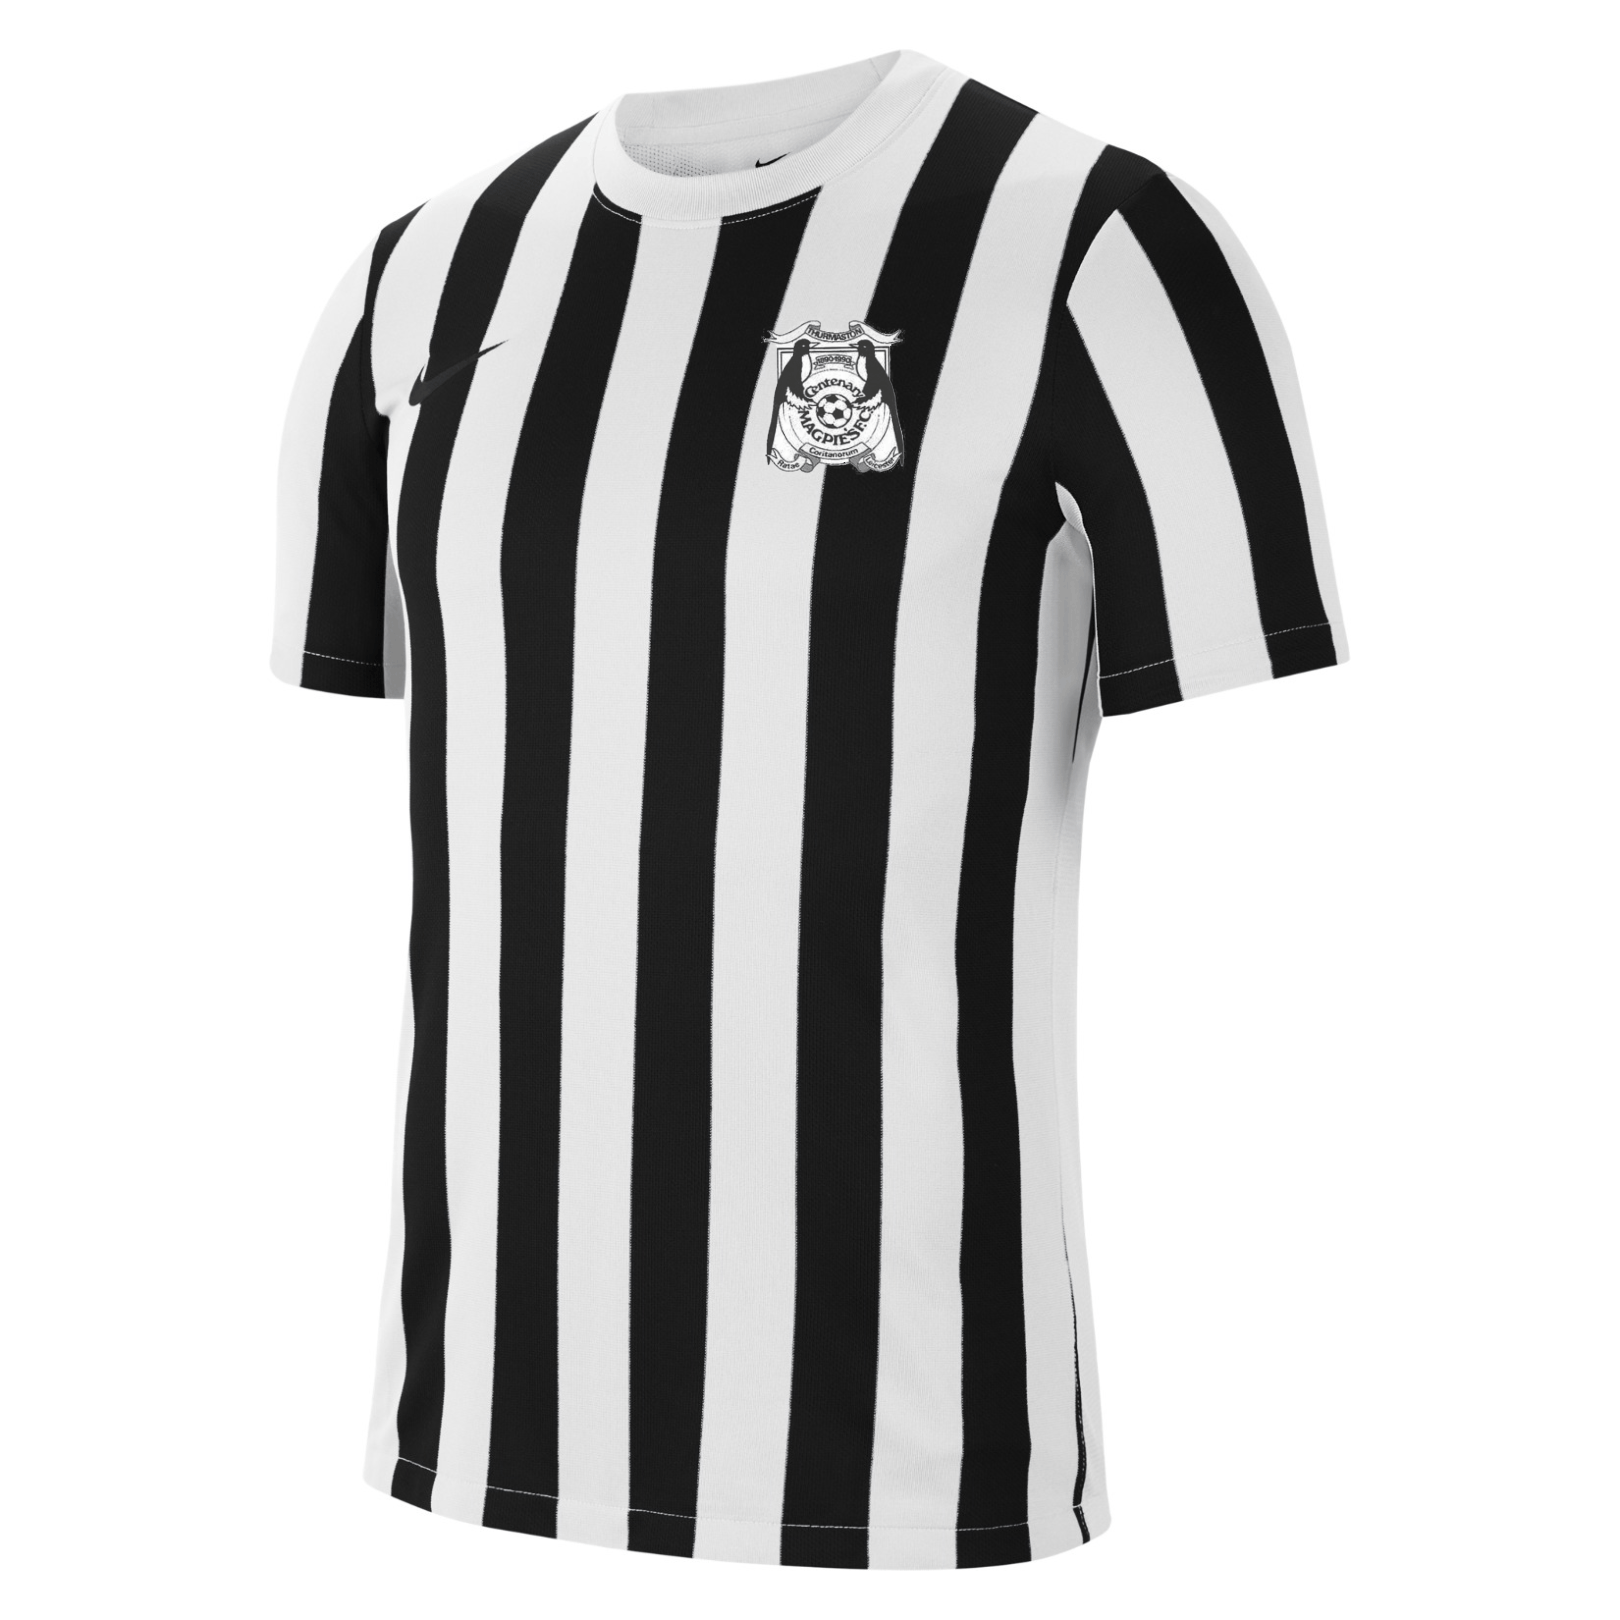 Thurmaston Magpies - Striped Division IV Jersey